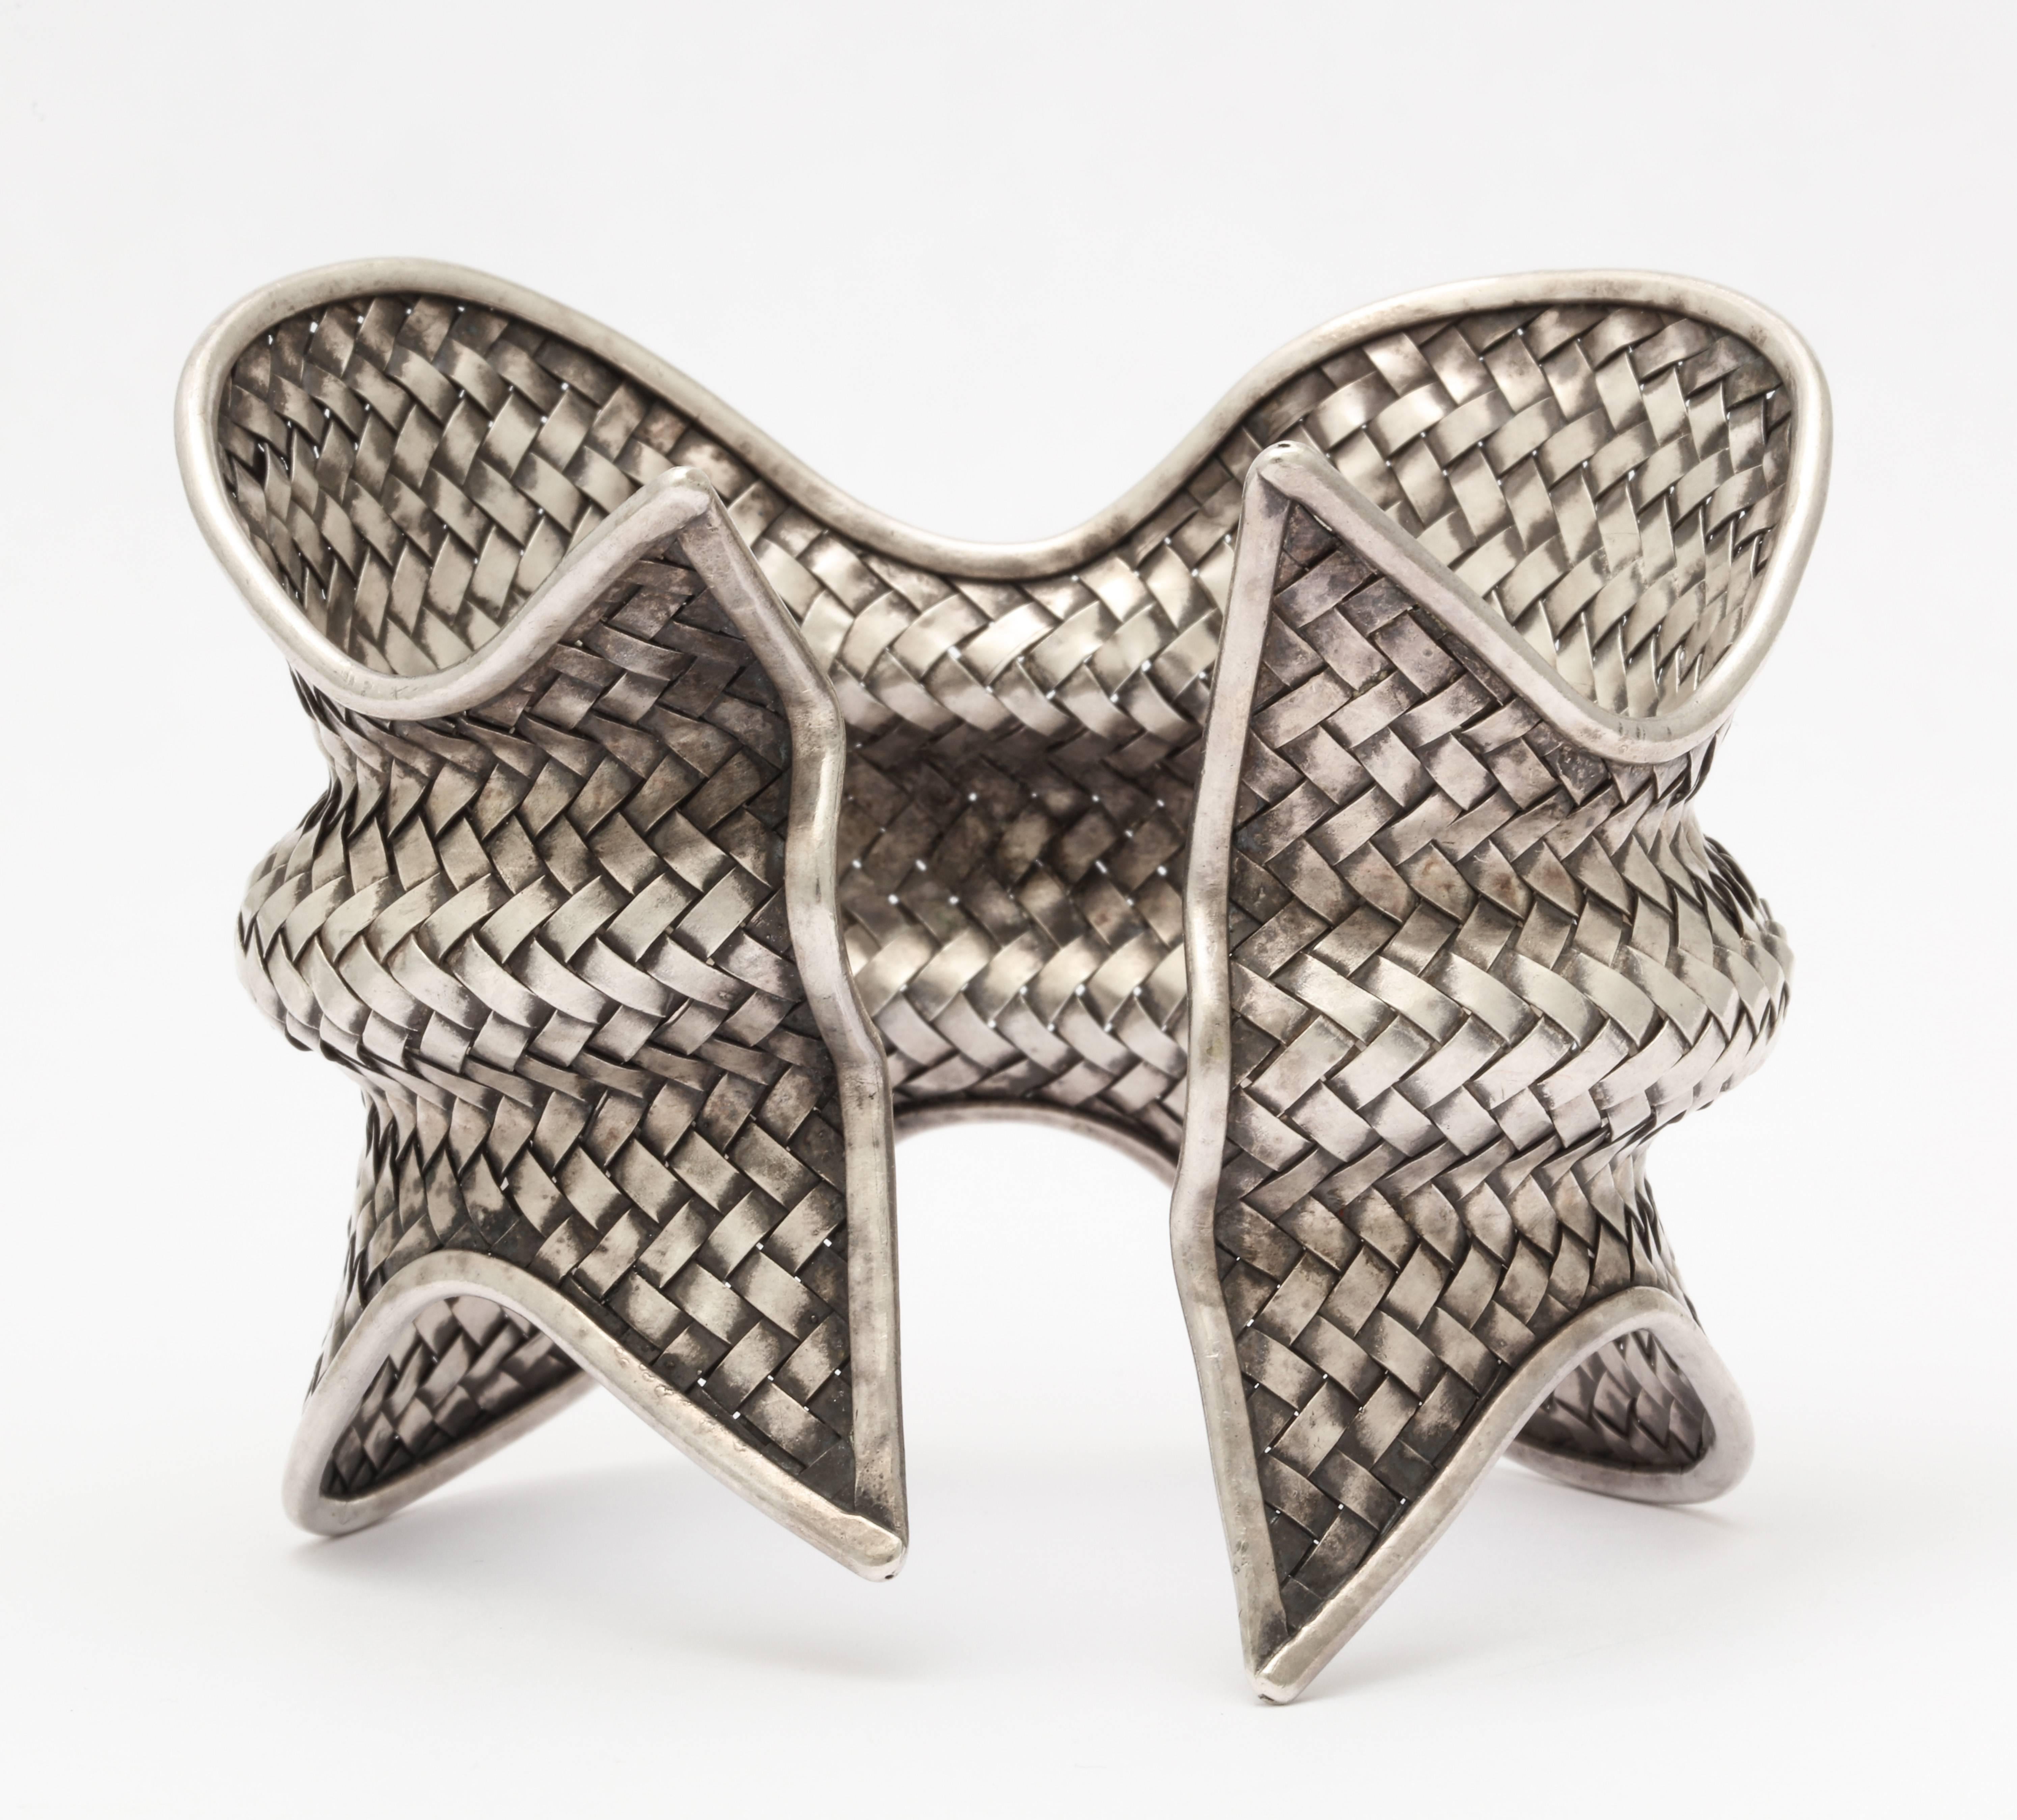 A fabulous designer woven modernist sterling silver cuff with great curves